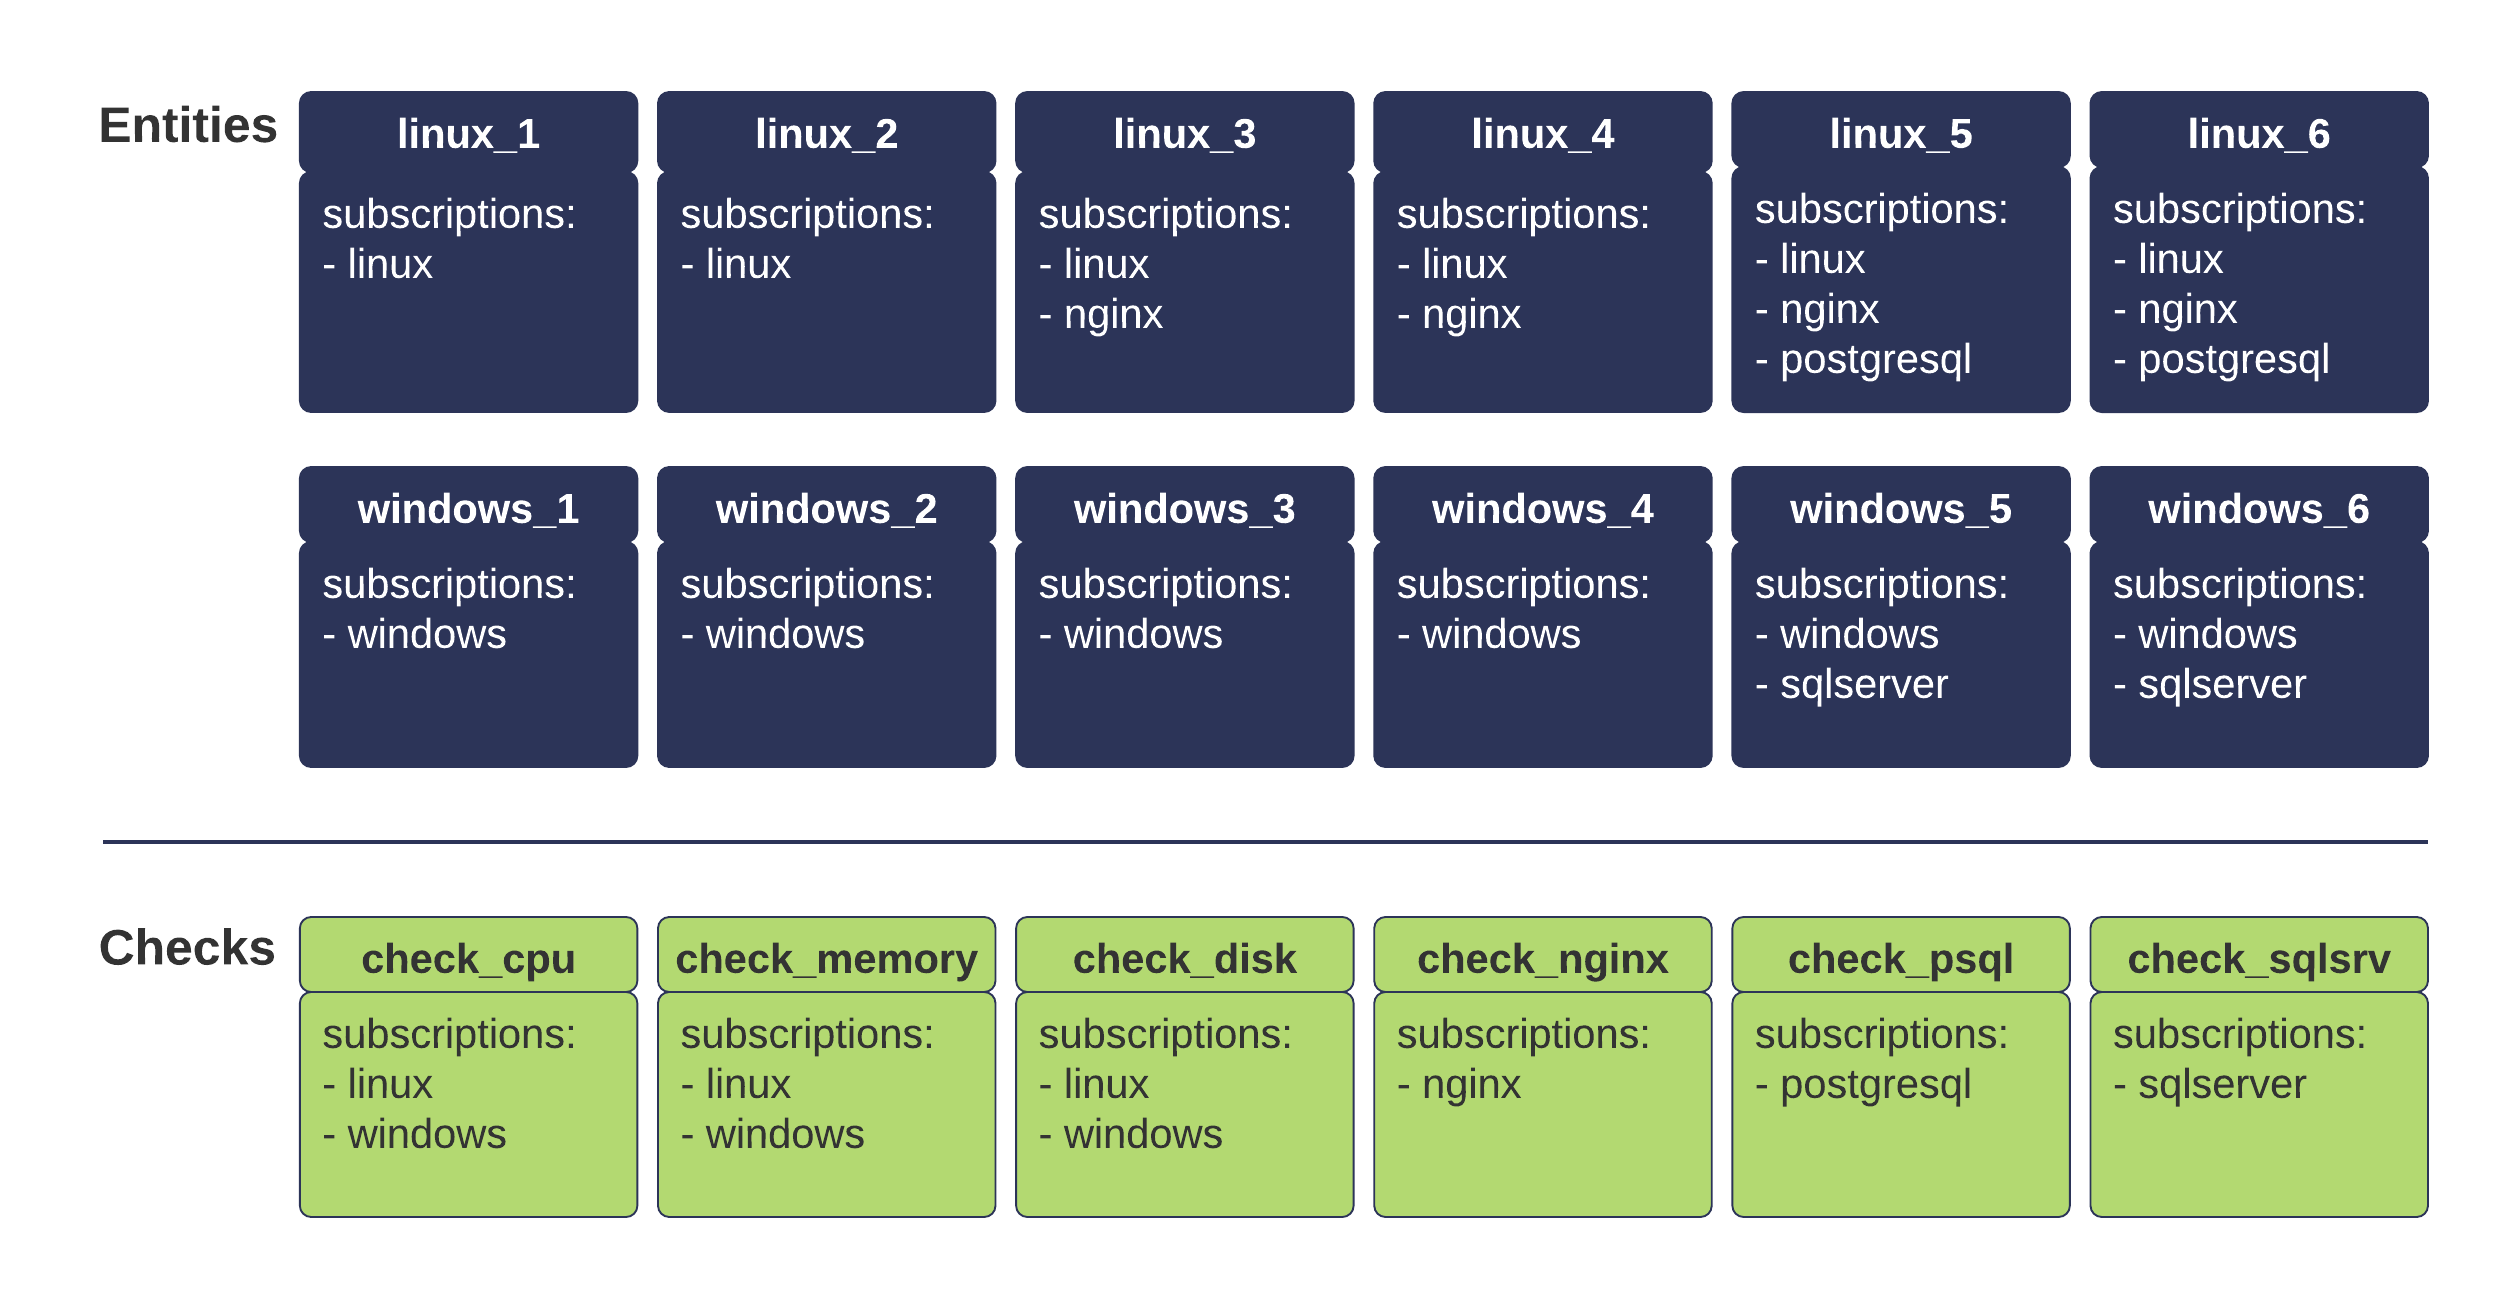 Diagram showing an example of Sensu check execution for multiple server entities based on subscriptions